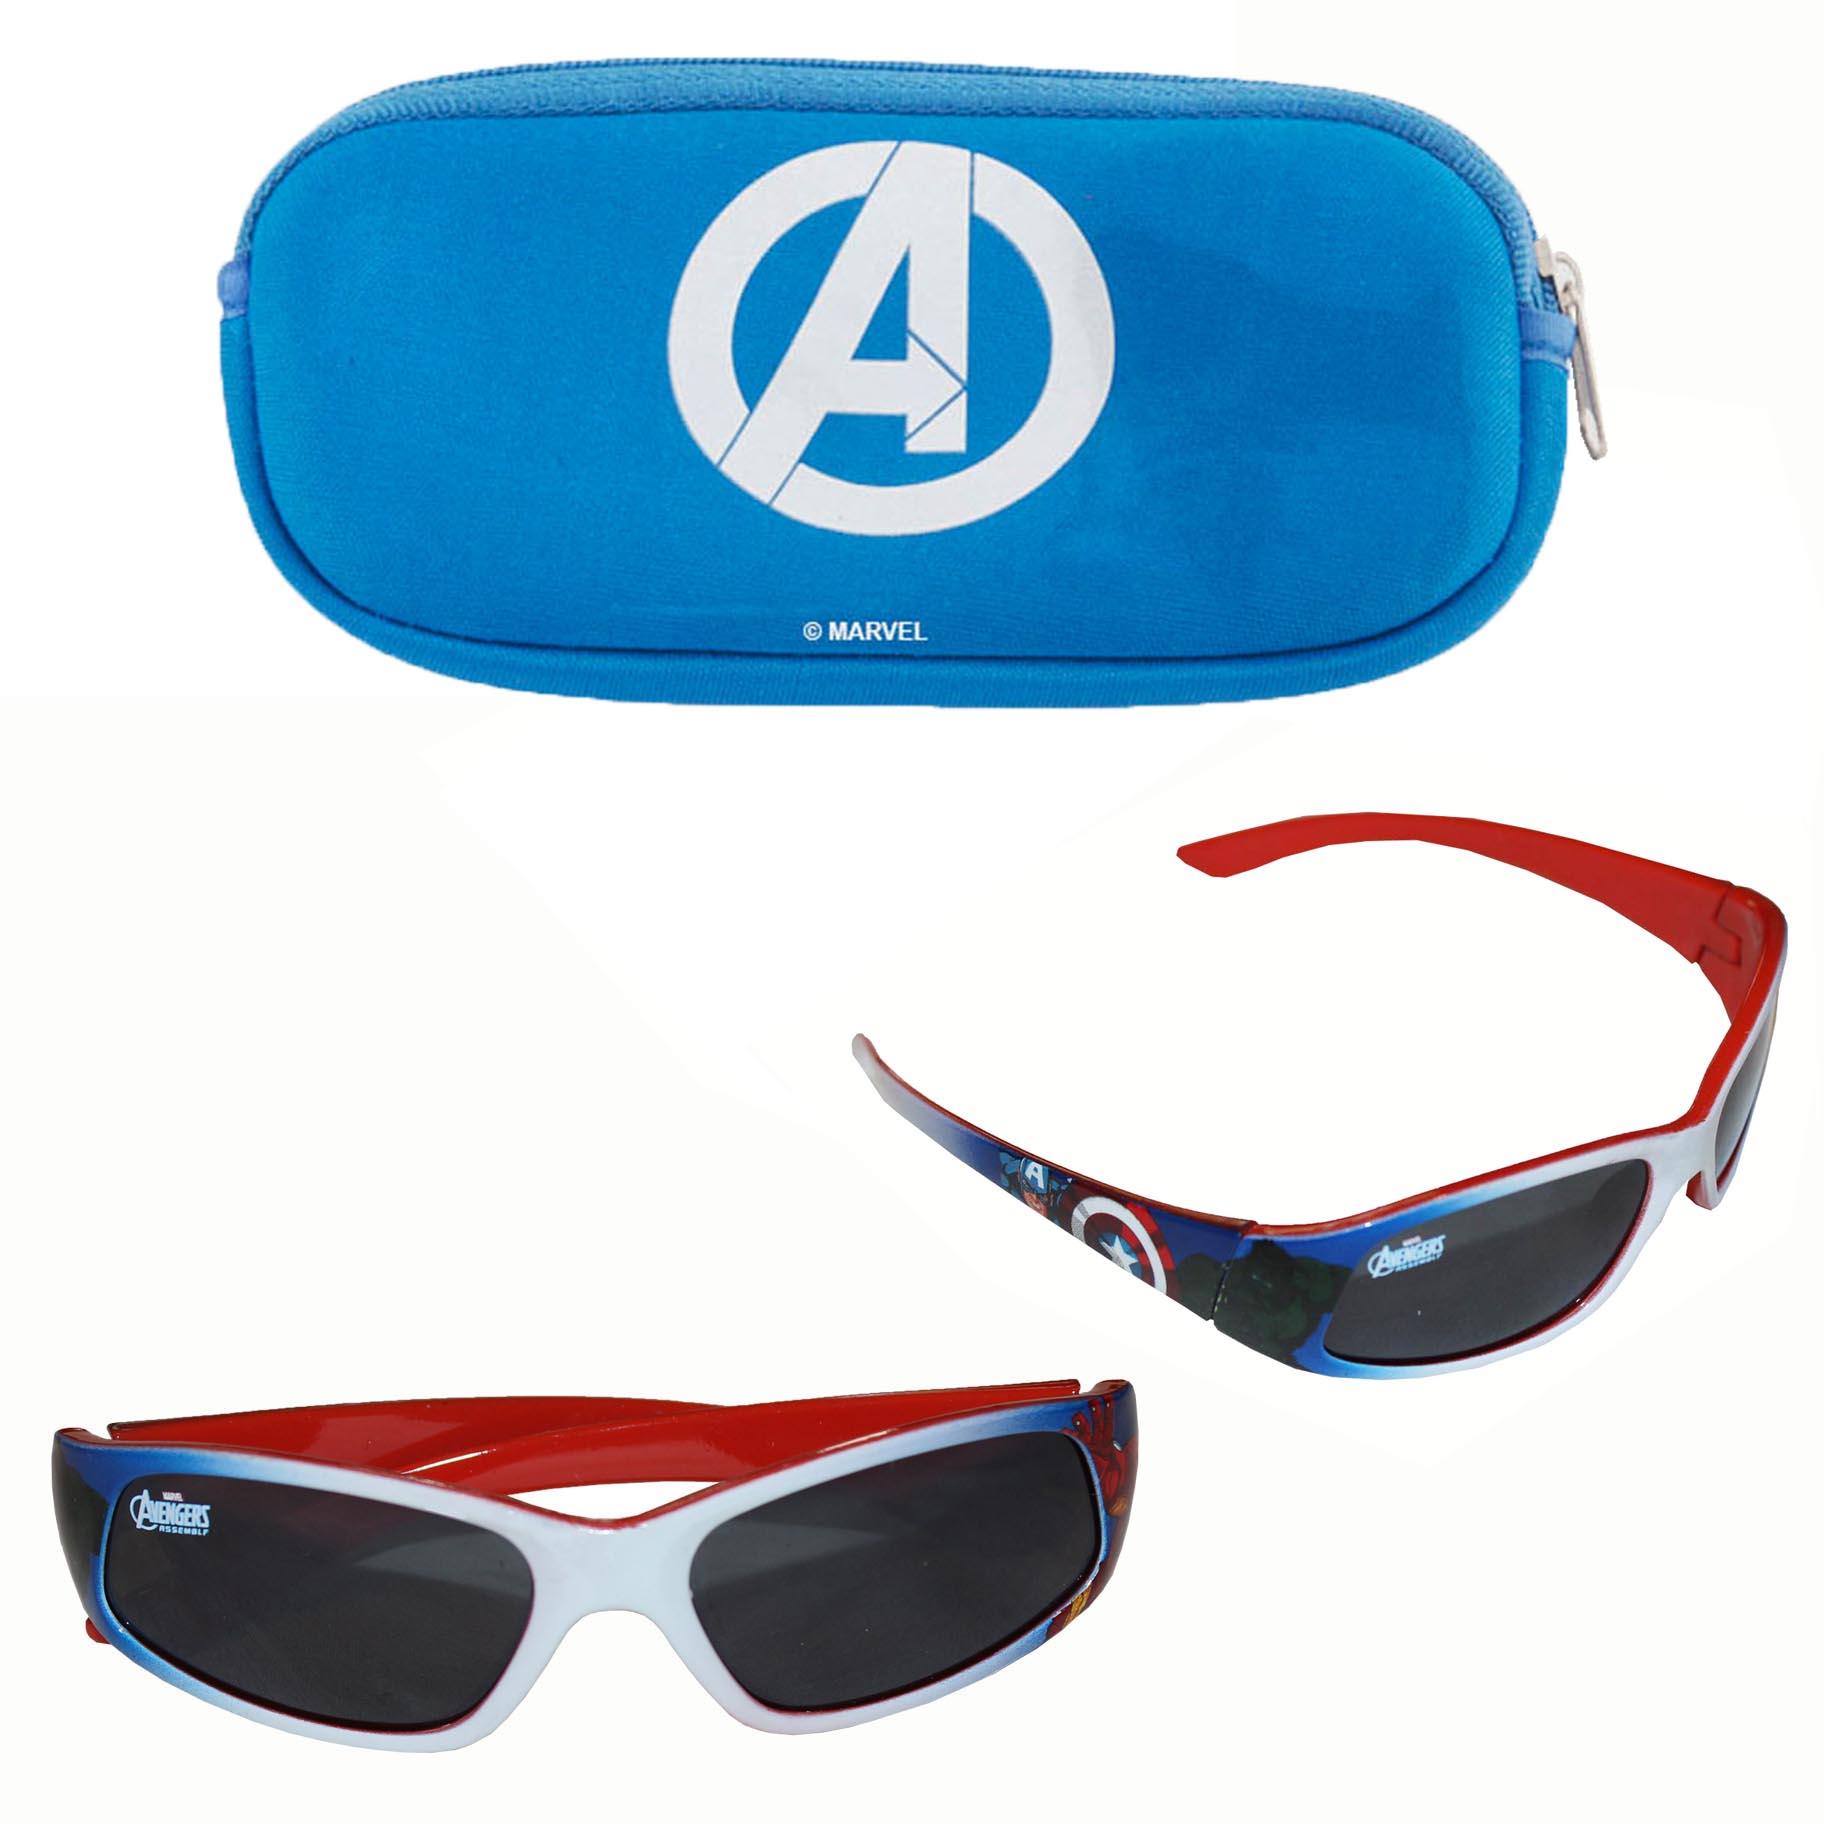 Children's Character Sunglasses and Case UV protection for Holiday - Marvel Avengers